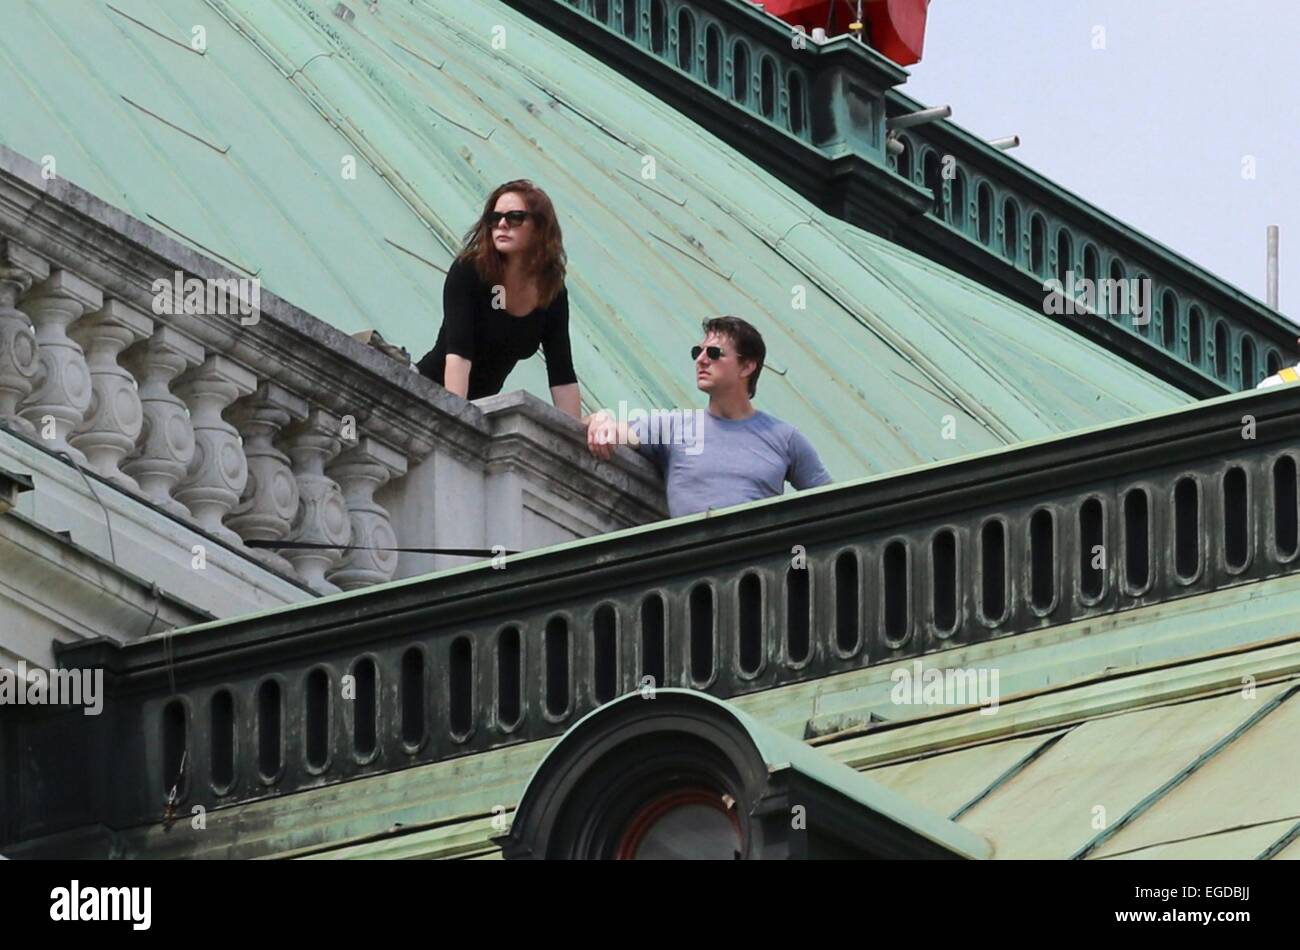 opera in mission impossible 5